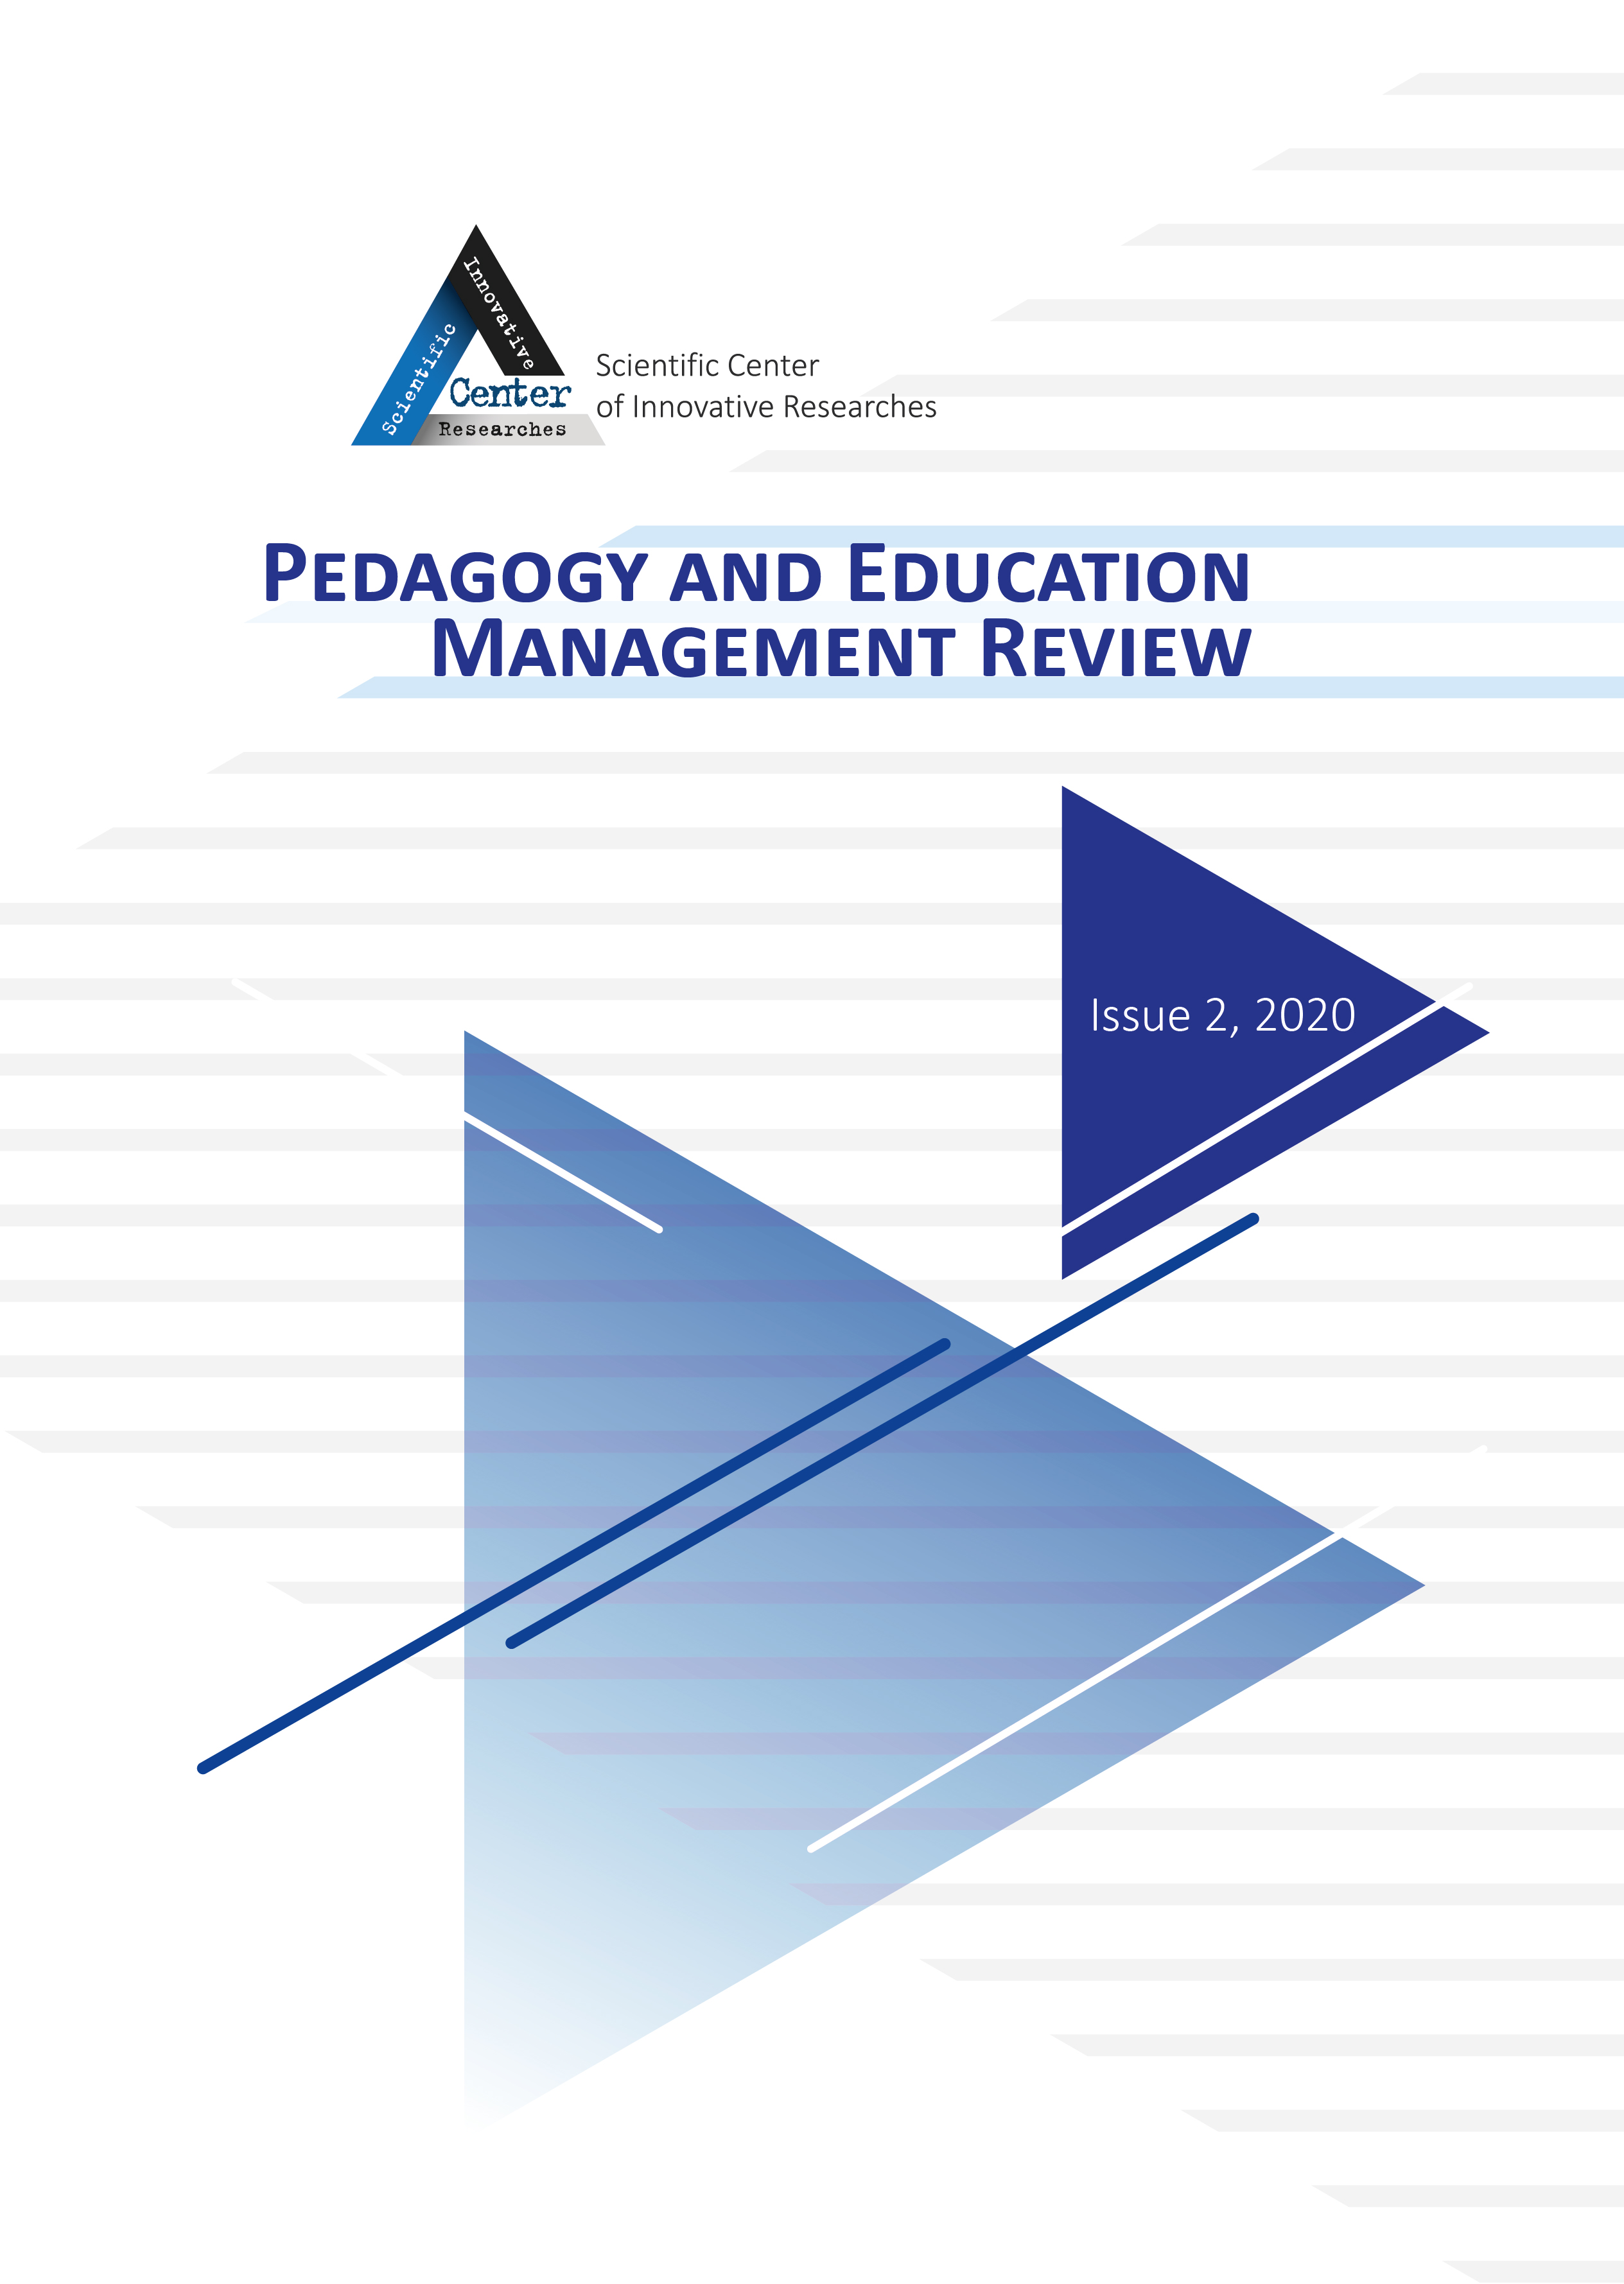 					View No. 2 (2020): PEDAGOGY AND EDUCATION MANAGEMENT REVIEW
				